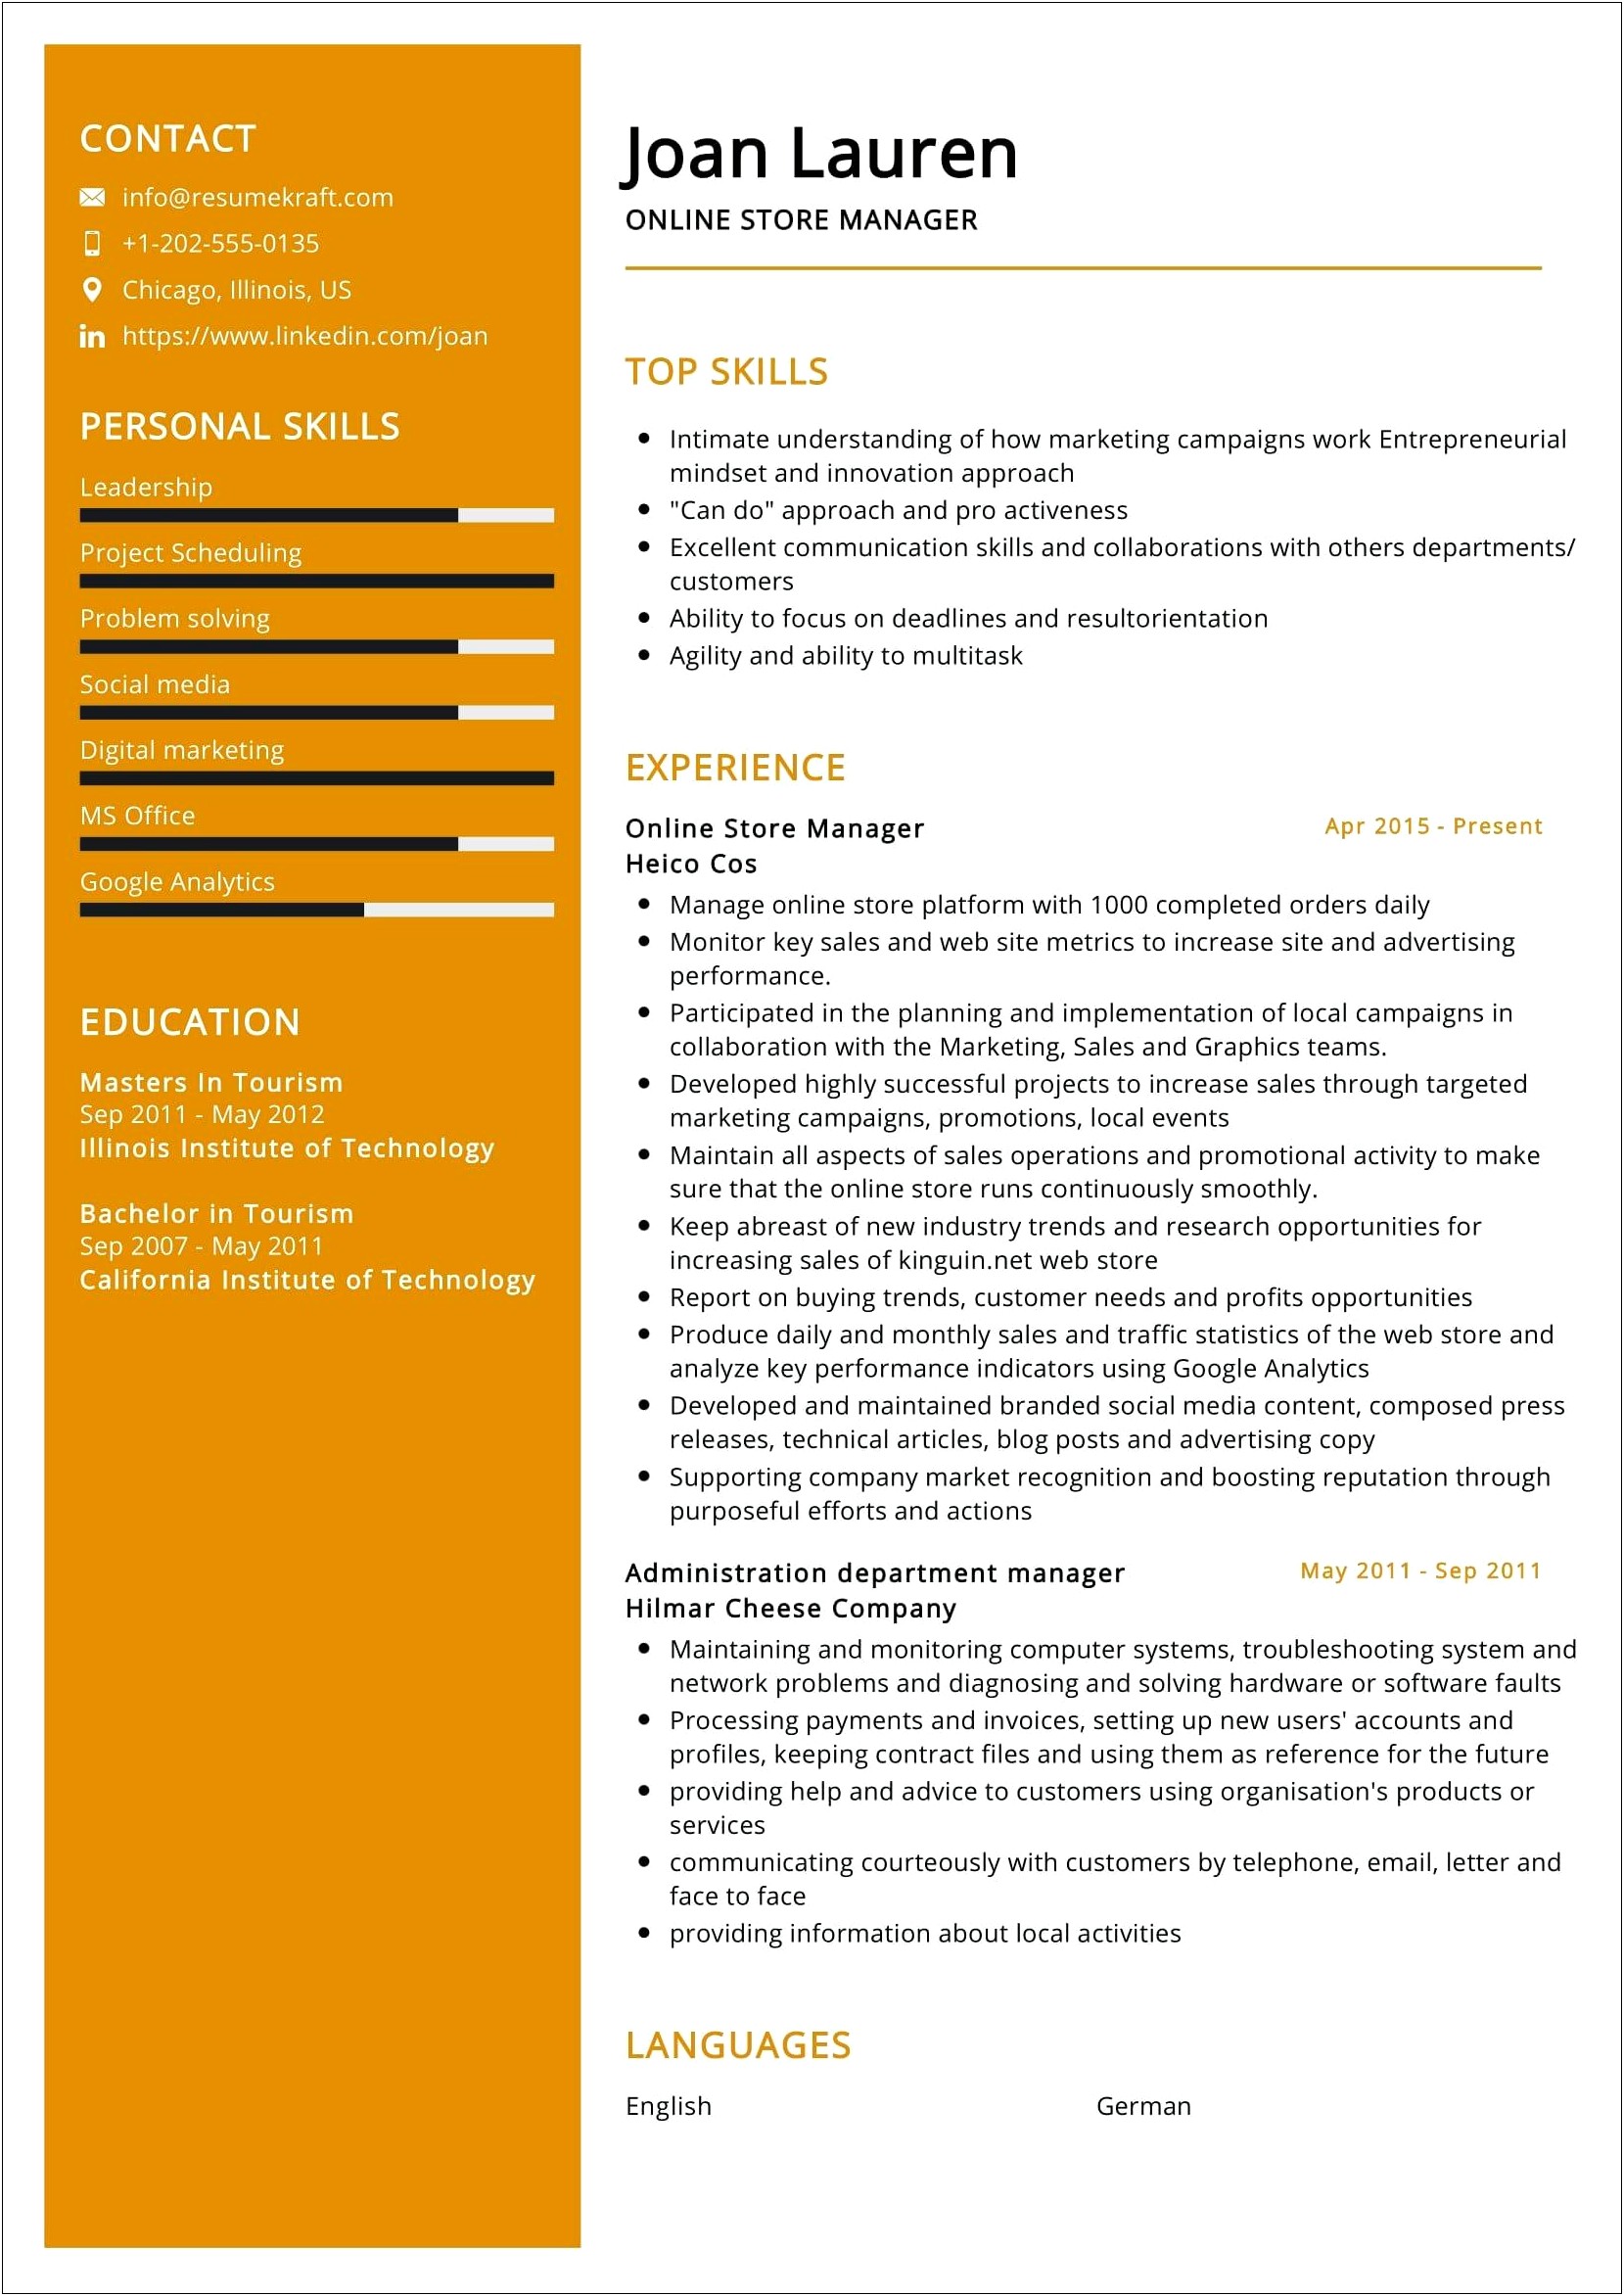 Working At Cheese Factory For Resume